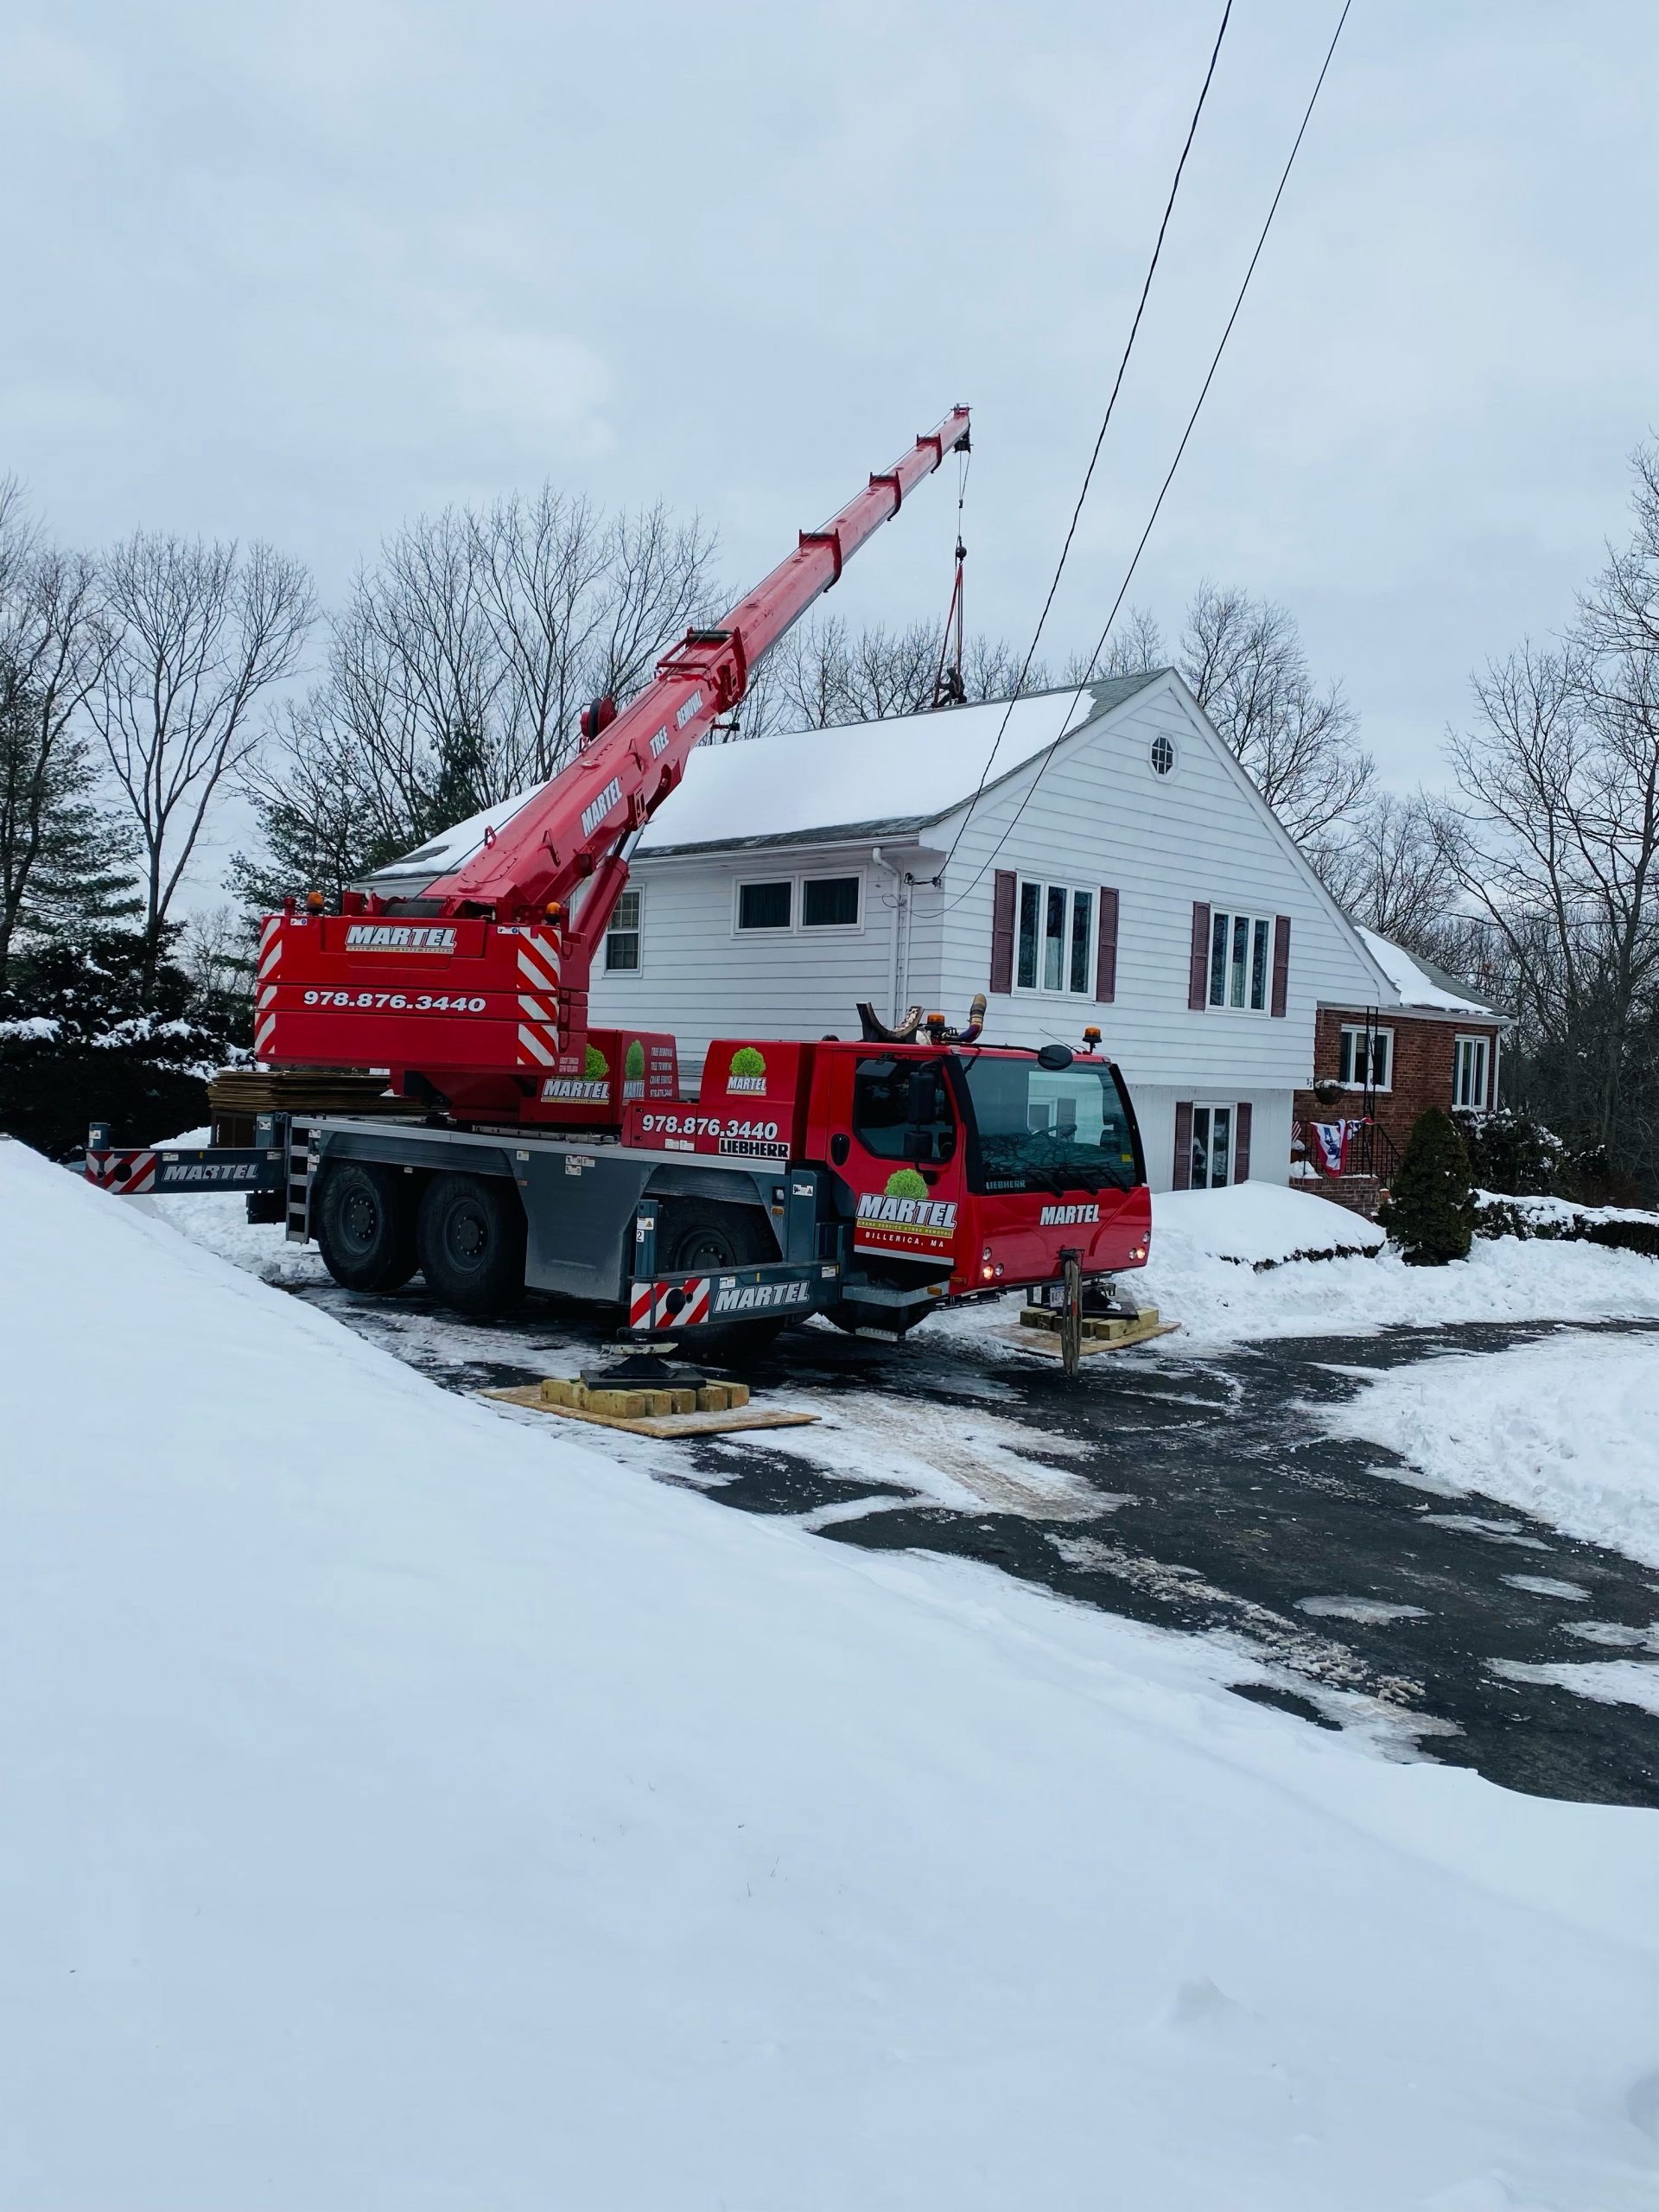 The crew and crane safely removed trees from this property in Winchester, MA.